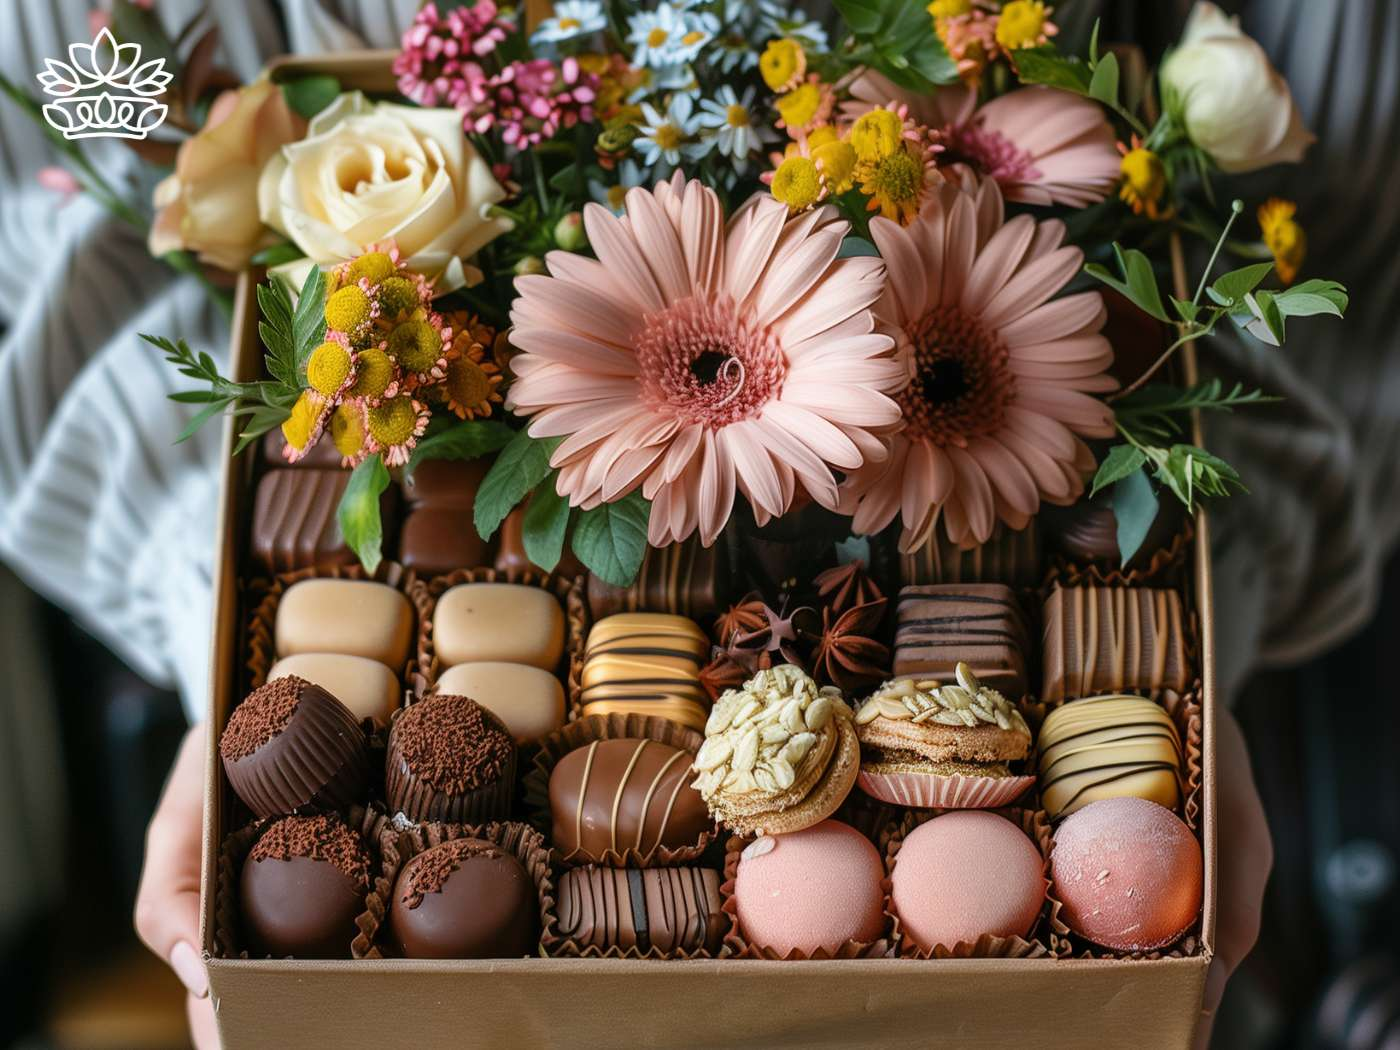 Exquisite Chocolate and Sweets Gift Boxes Collection featuring a large variety of milk chocolates, vanilla macarons, and macadamia biscuits, complemented by Fabulous Flowers and Gifts, perfect for any chocolate lover gift hamper.